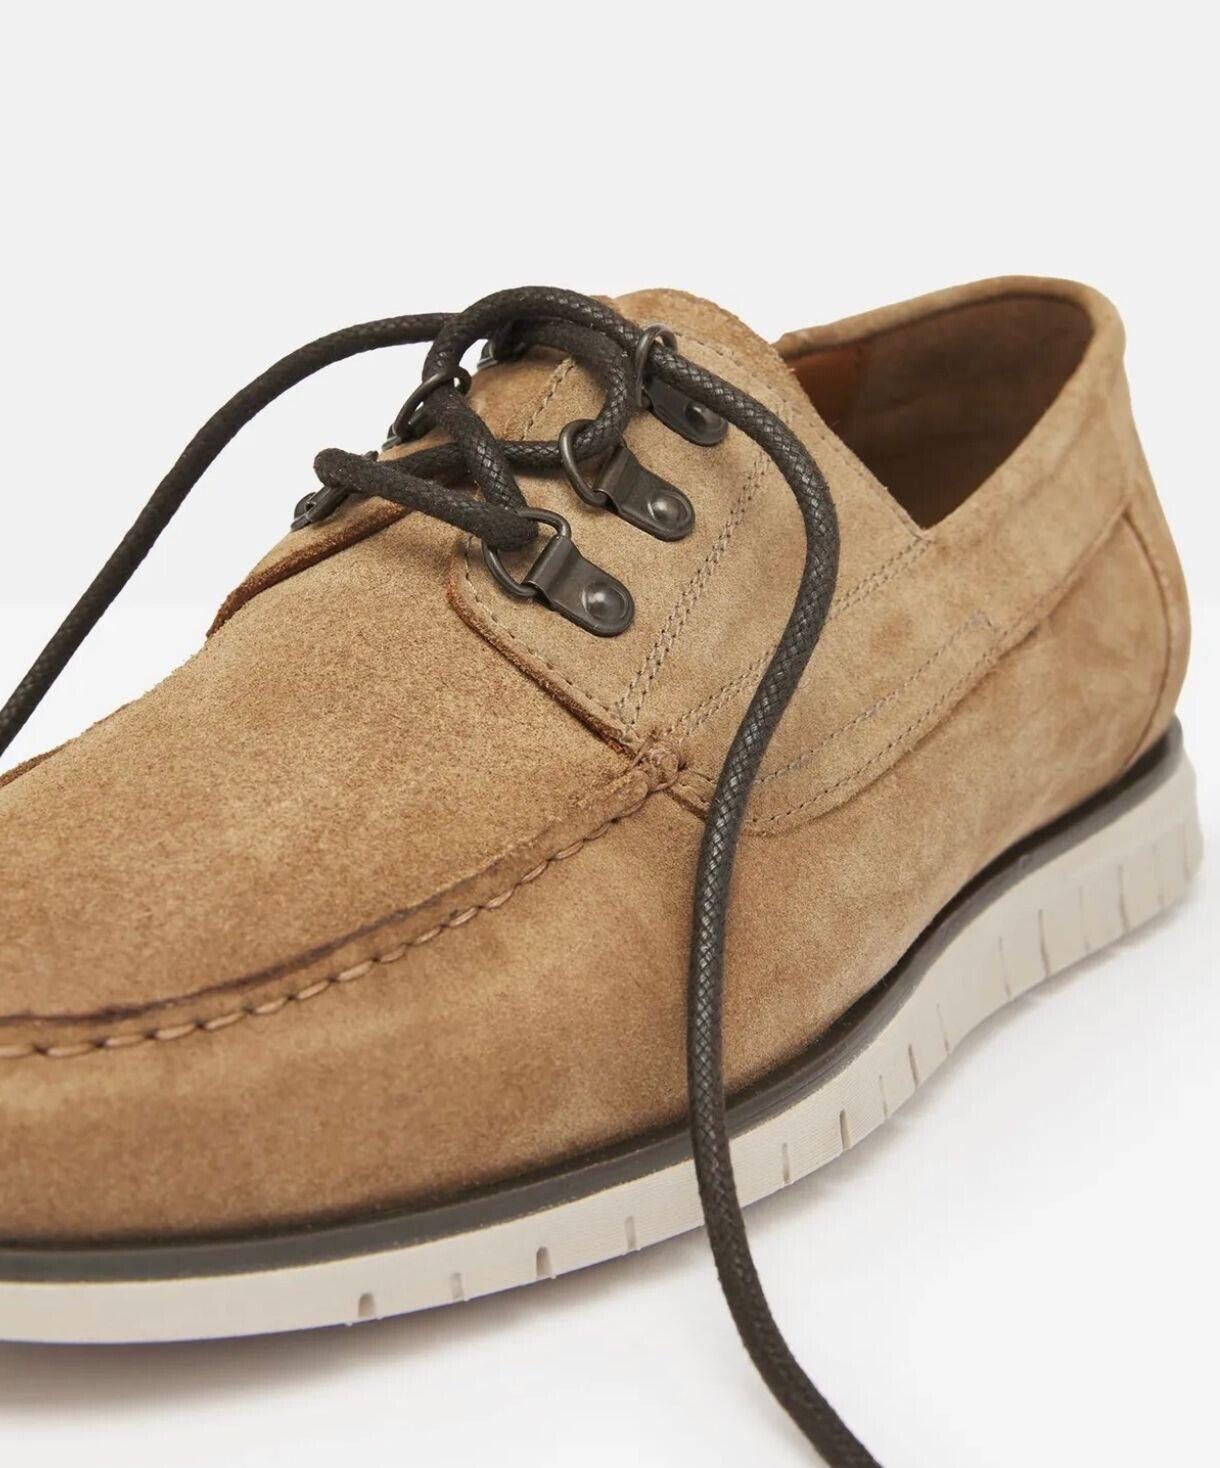 Joules Mens Sand Wedge Hiker Boat Shoes Sizes 6.5, 7, 8, 9, 10, 11, 11.5 RRP £65